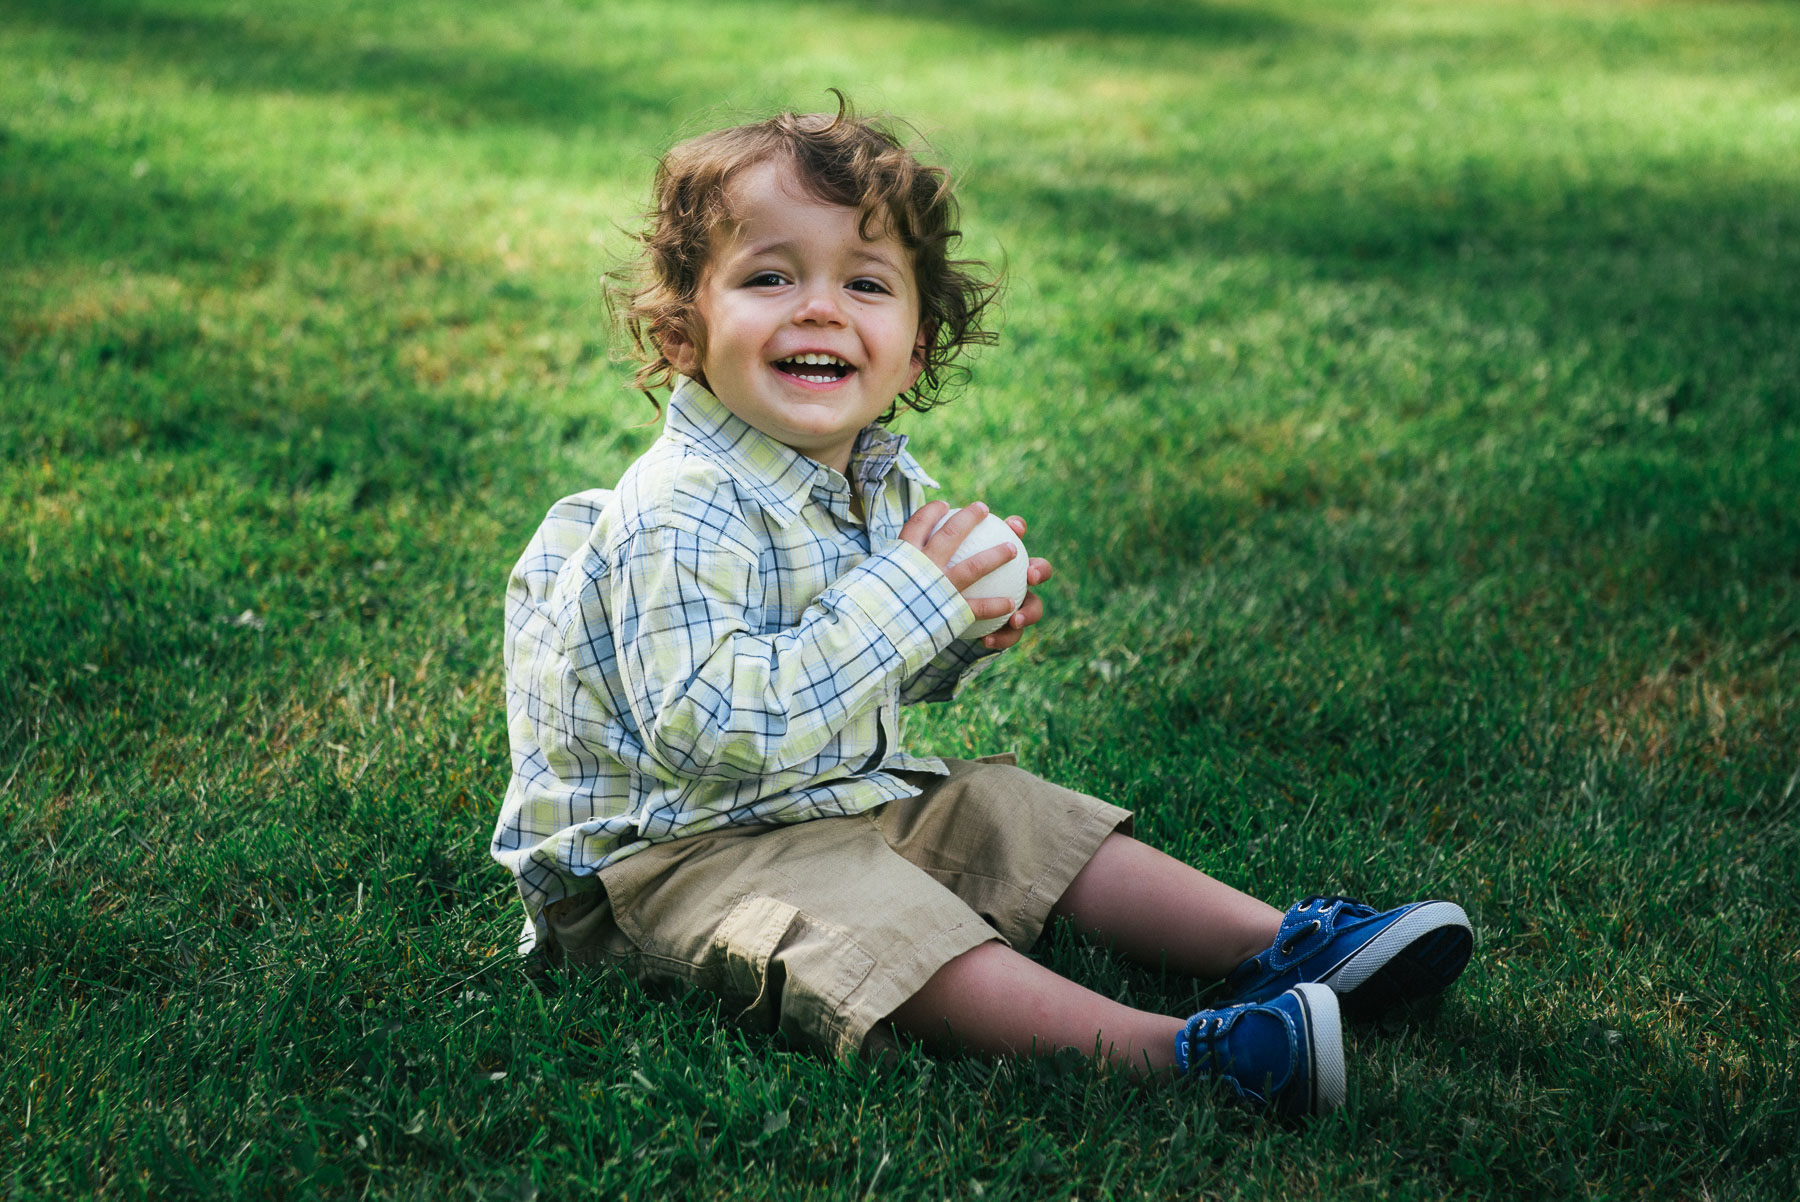 Toddler boy sitting in grass smiling and holding baseball